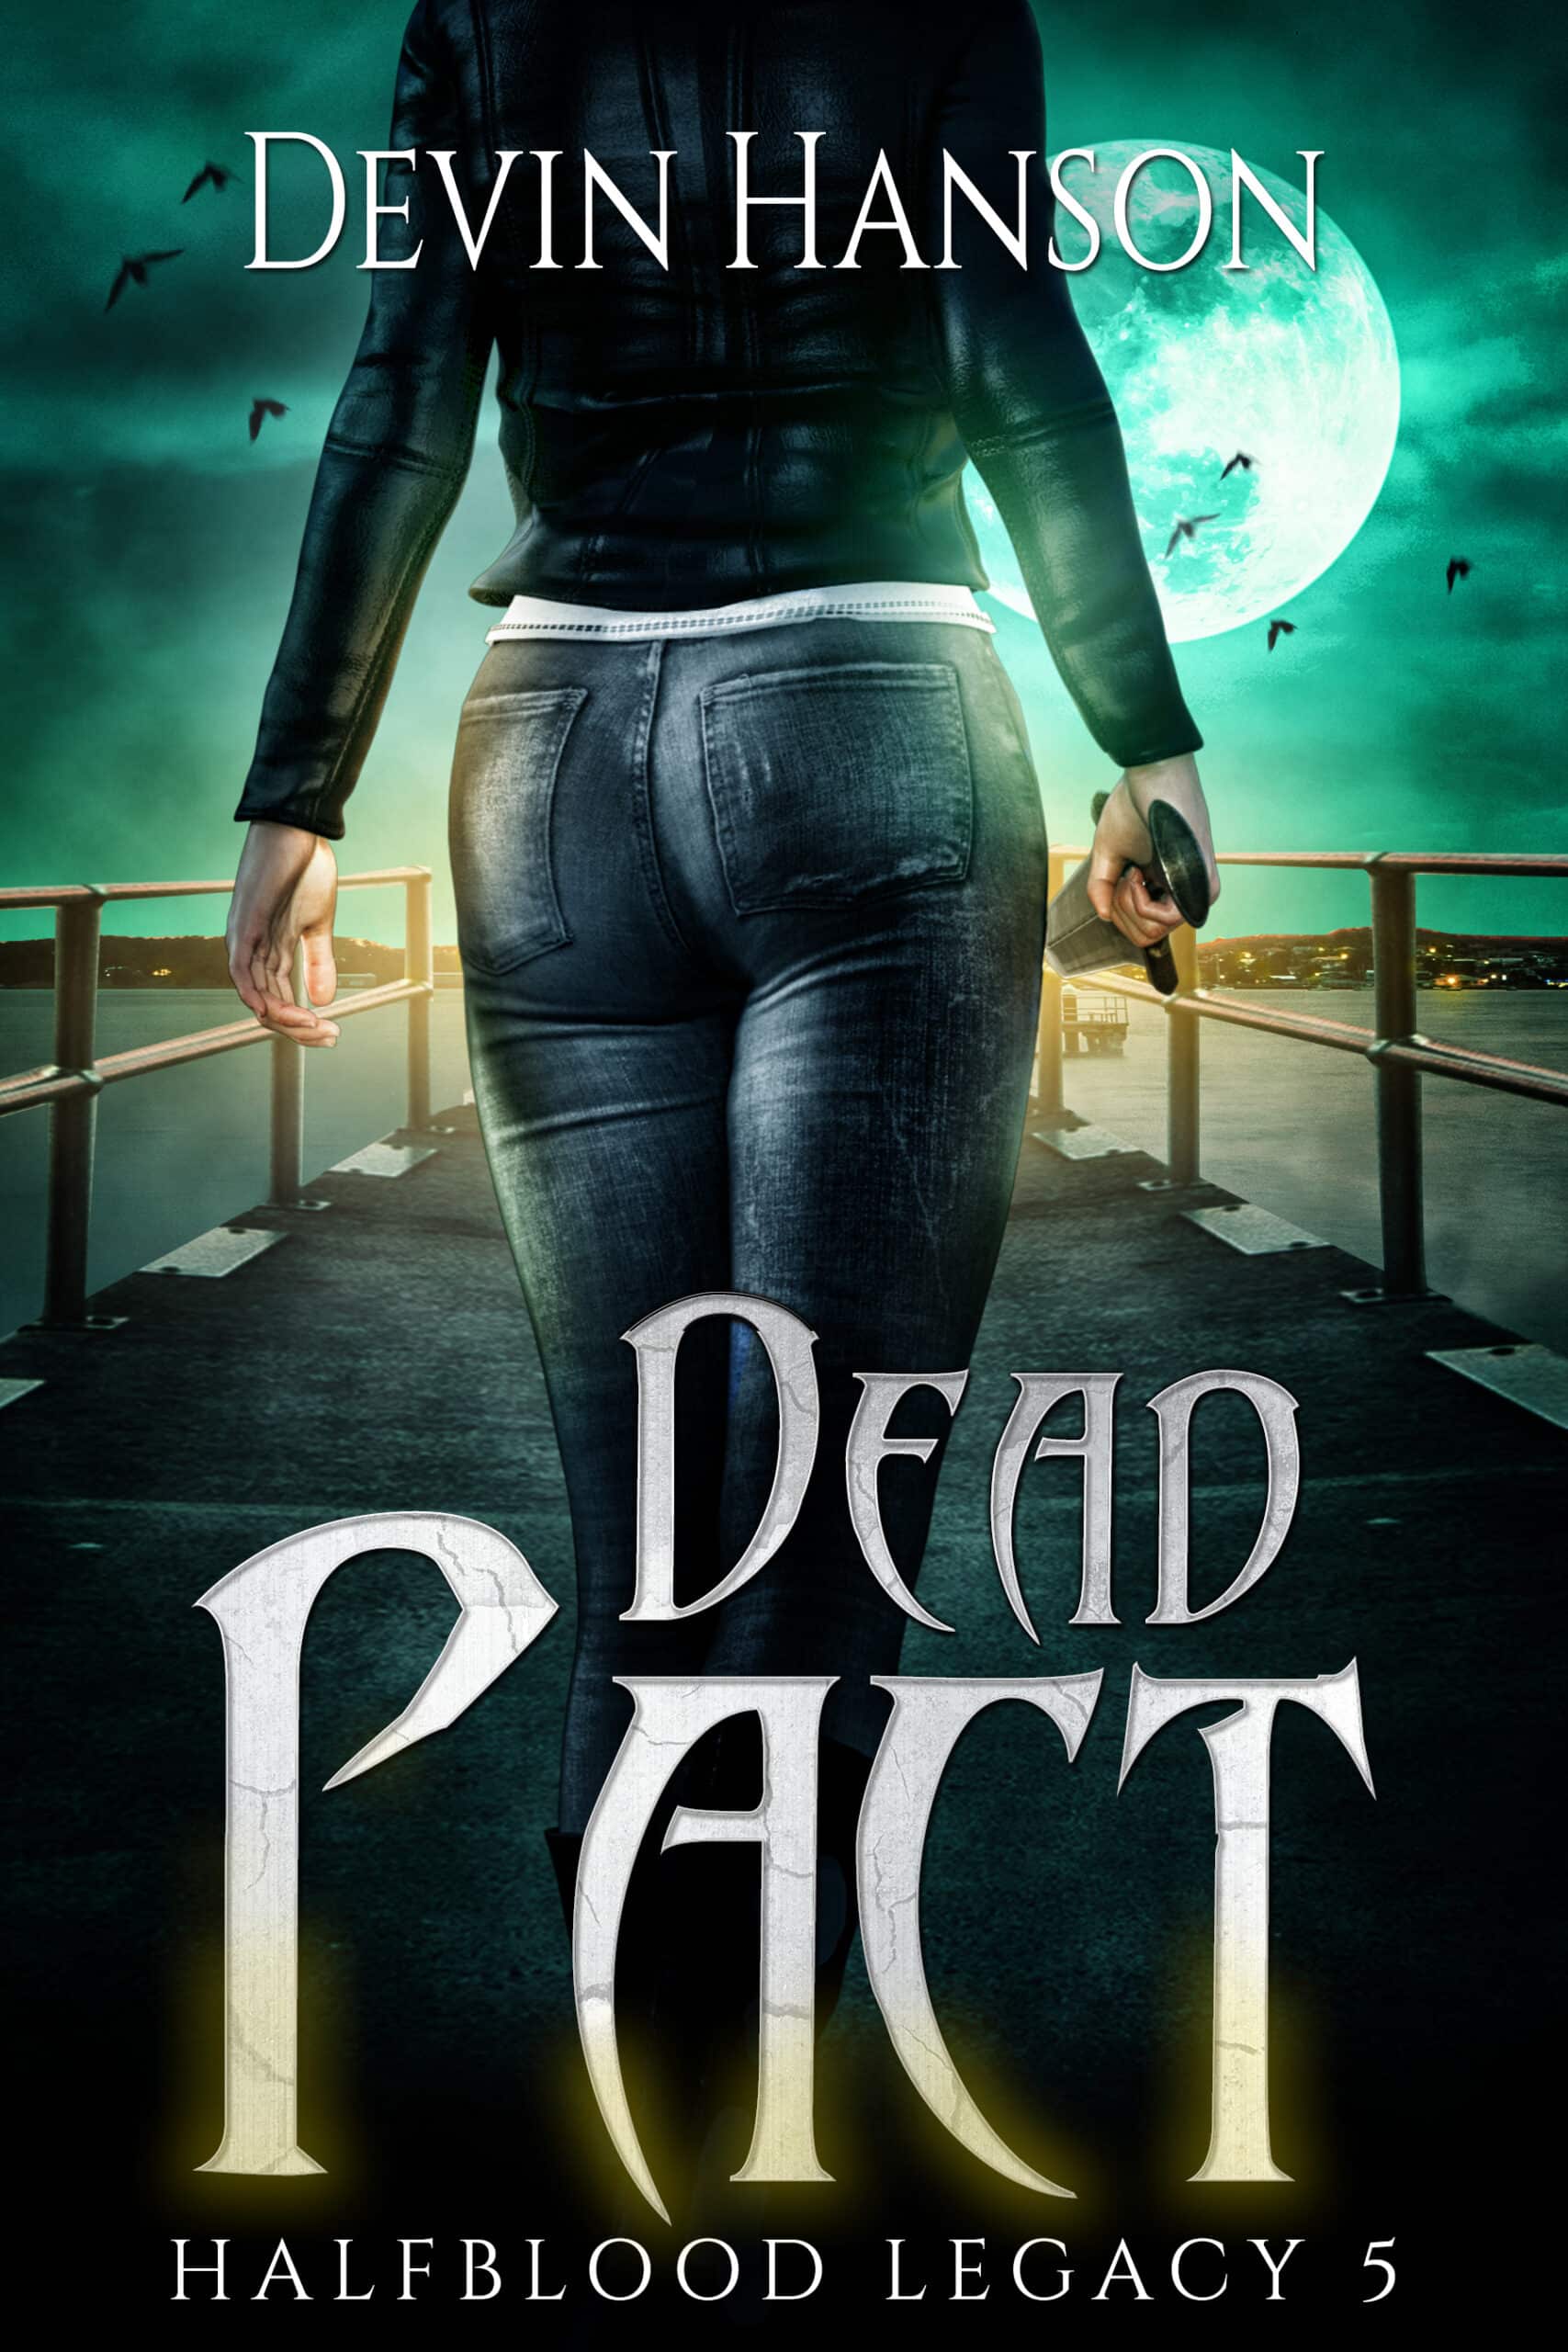 Dead Pact